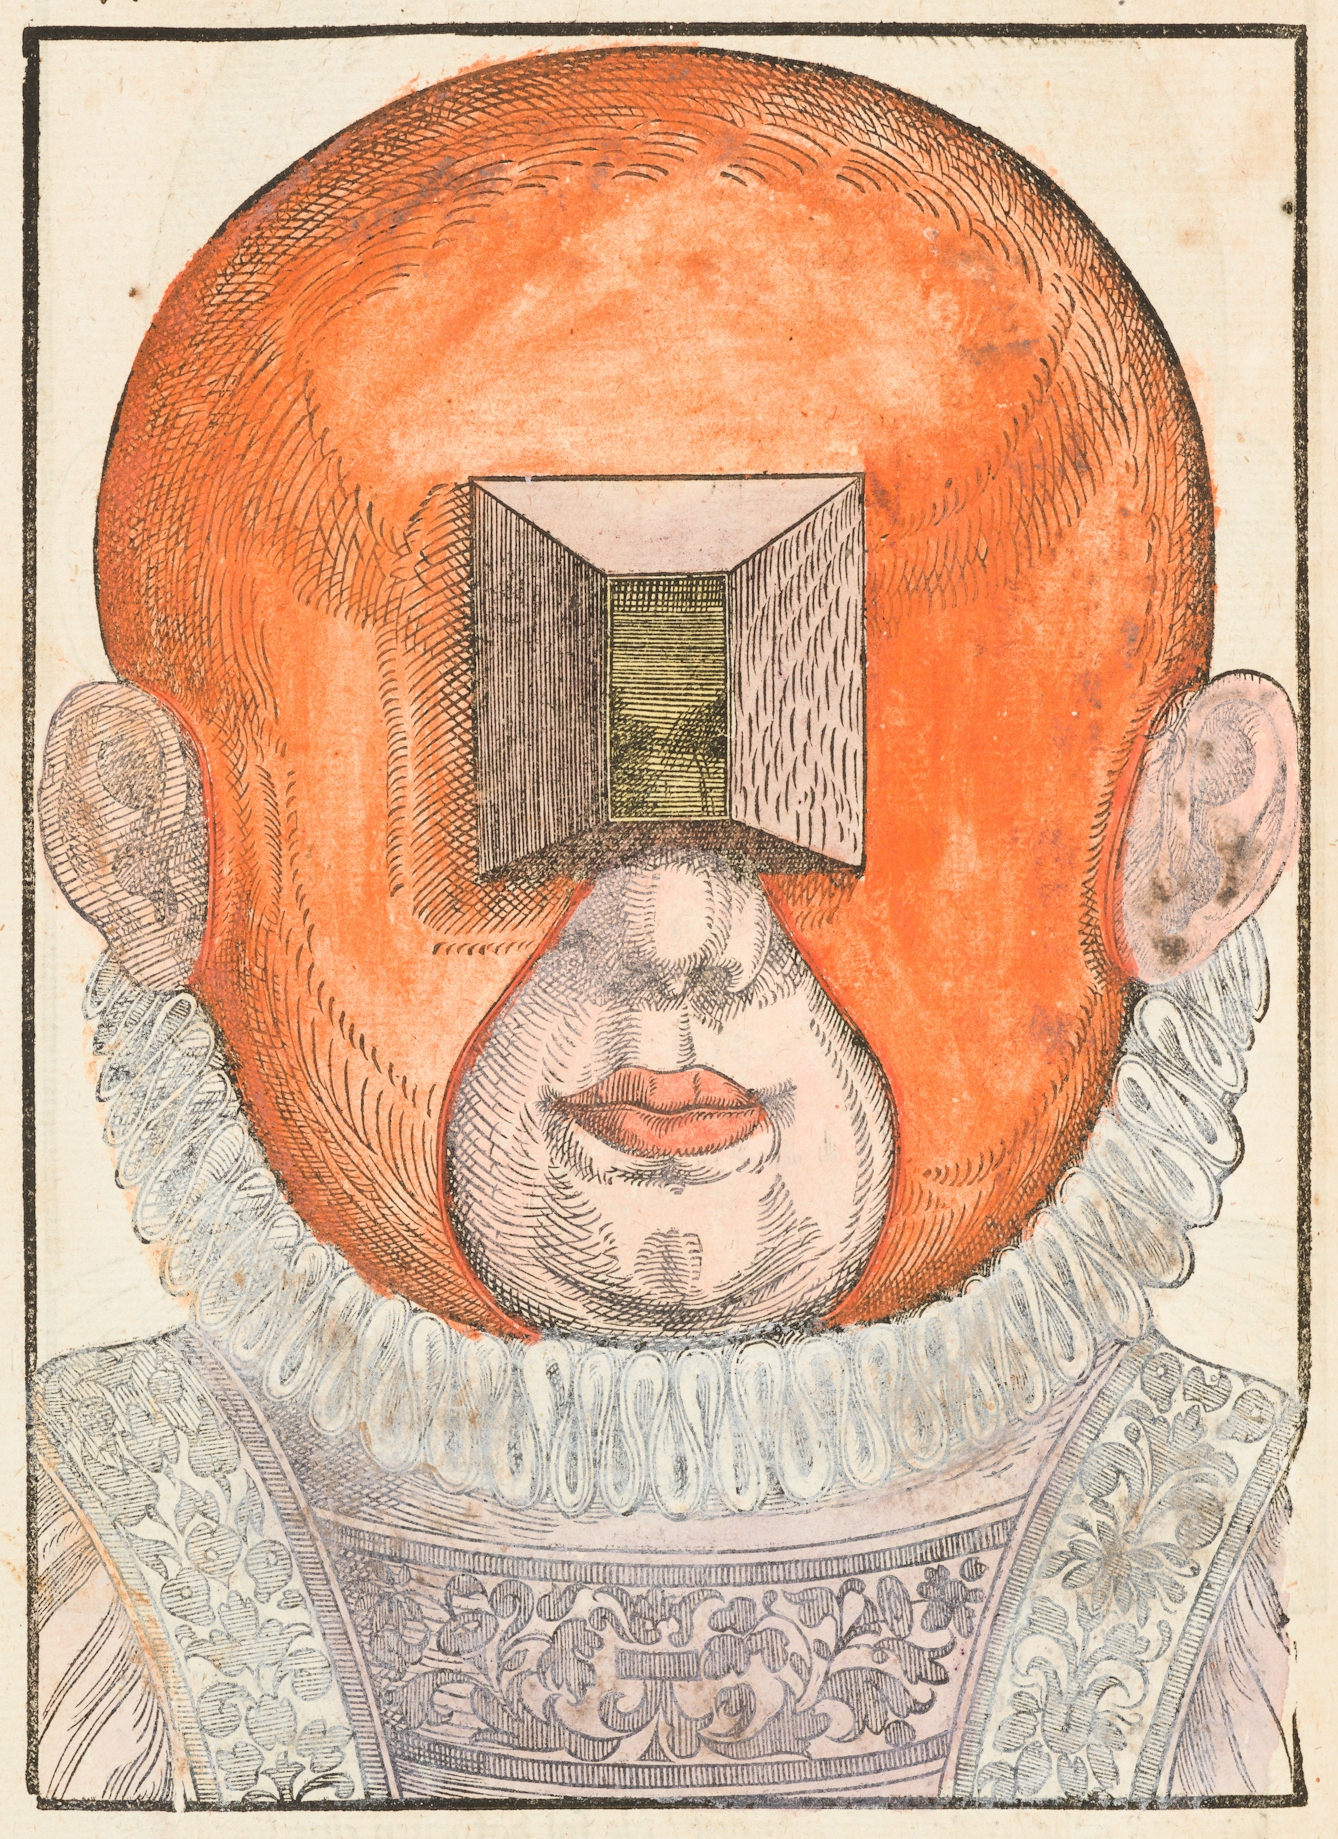 Coloured engraving from a 16th century book showing a person's head and neck ruff. On their head is a red mask which has small box like construction in front of their eyes and larger holes exposing their ears, nose and mouth.